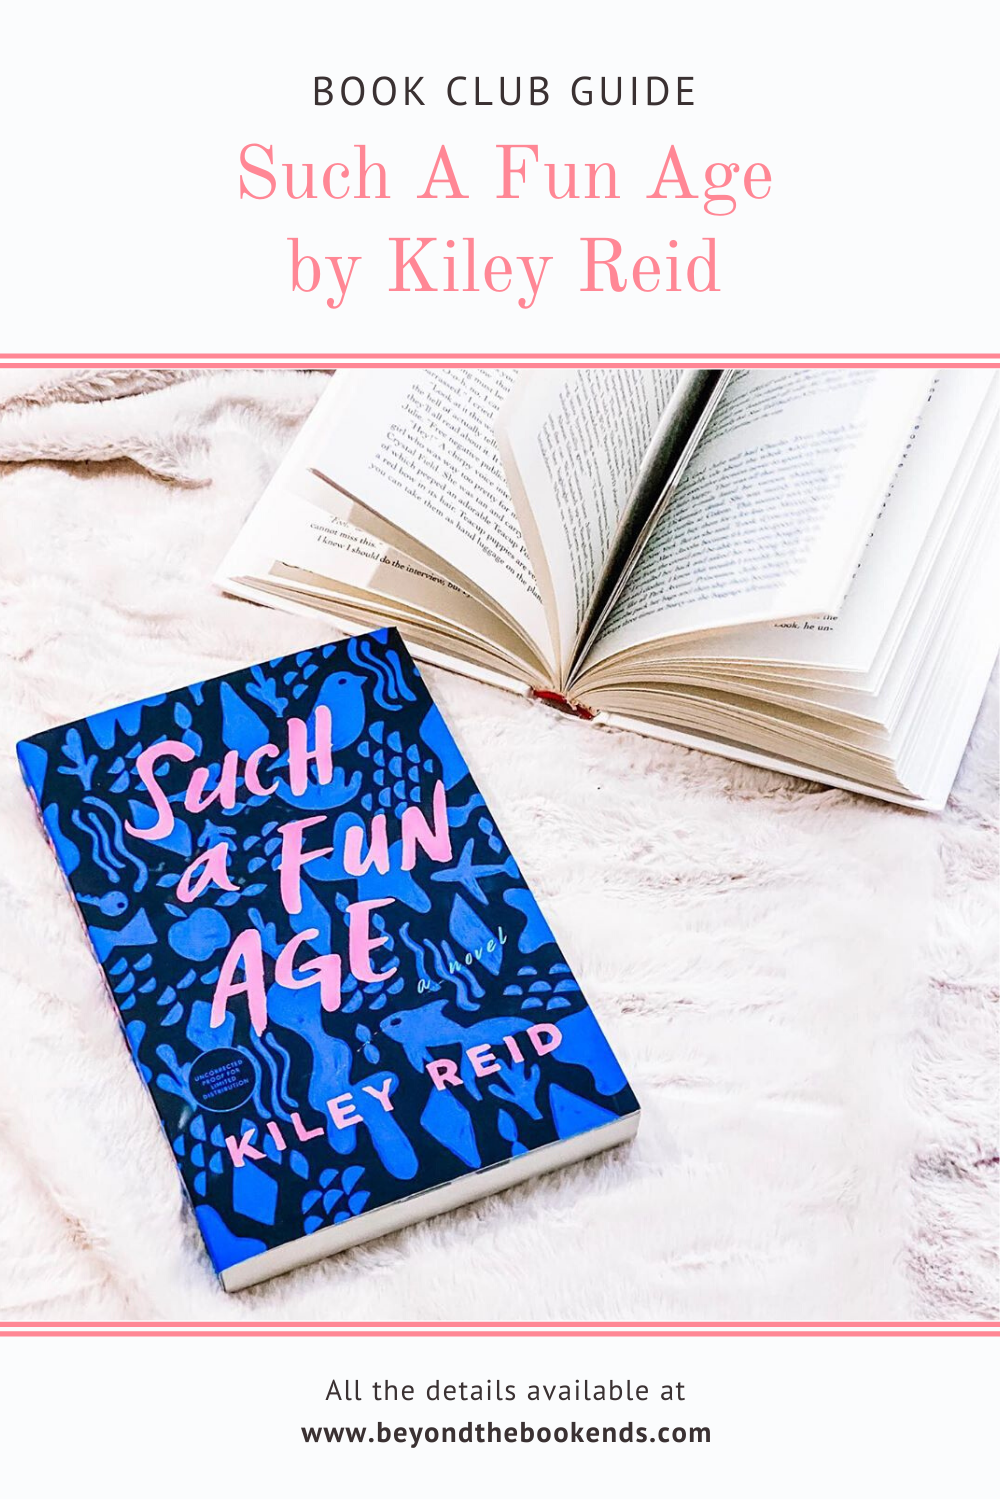 How to host a Such a Fun Age book club. Food, discussion questions, actives, and more to make the newest Reese Witherspoon book club pick a hit for your book club/